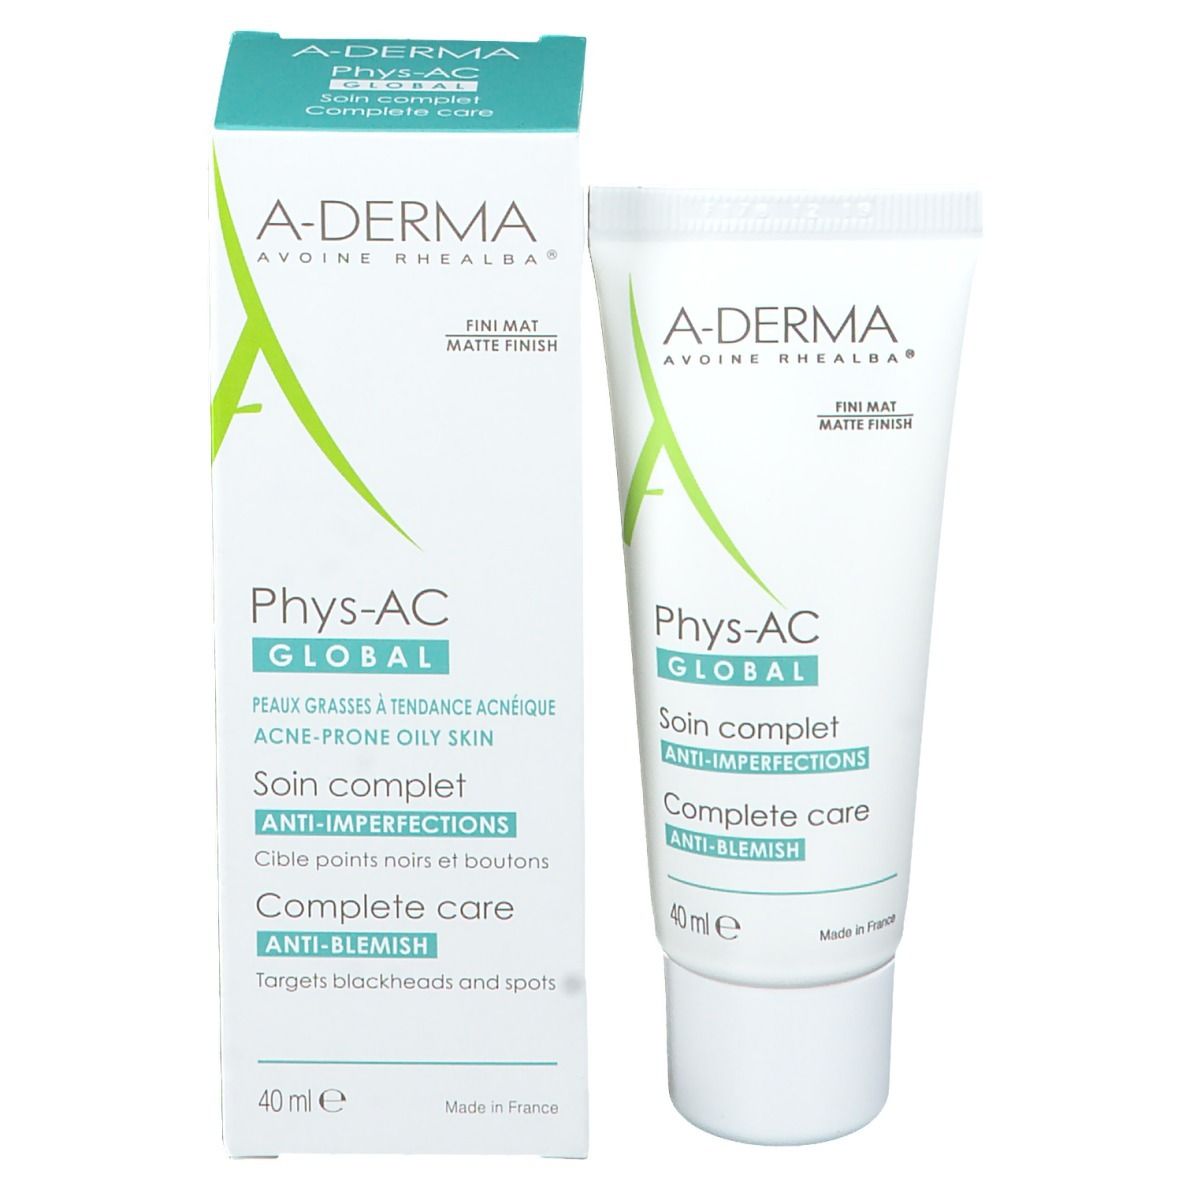 A-Derma Phys-AC Global Soin Complet Anti-Imperfections